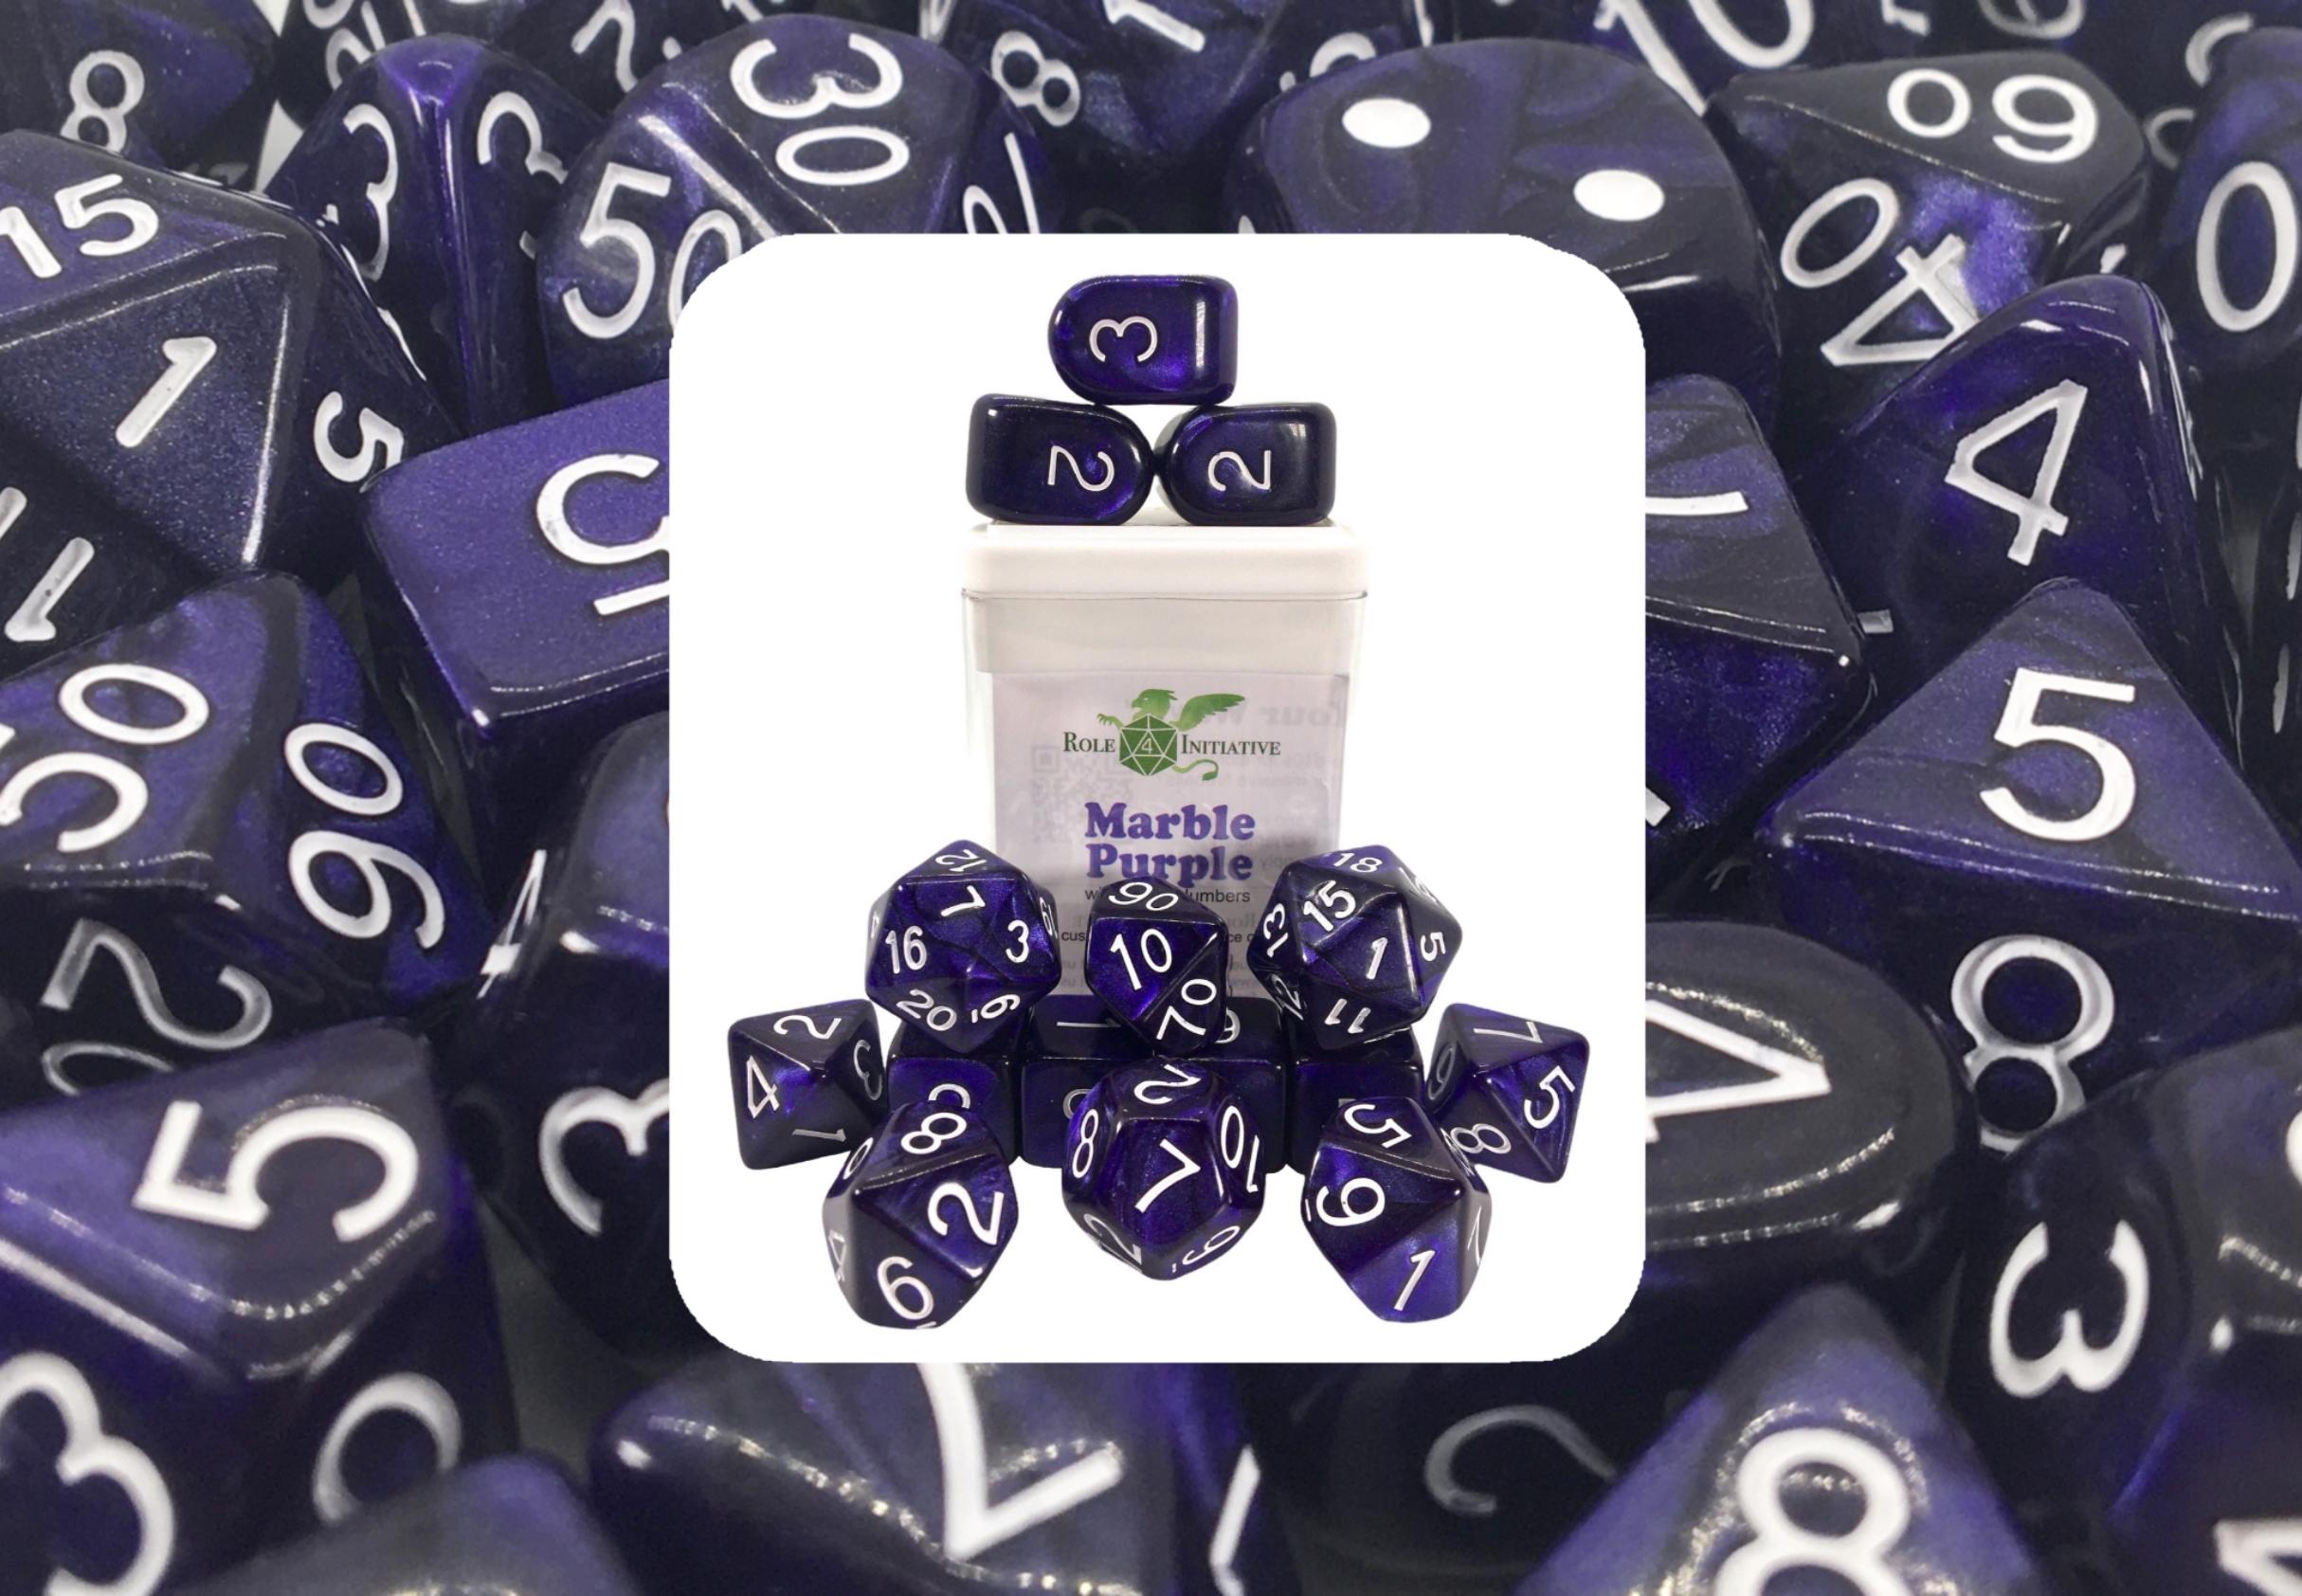 Role 4 Initiative: Polyhedral 15 Dice Set: Marble Purple with White (Arch D4) 